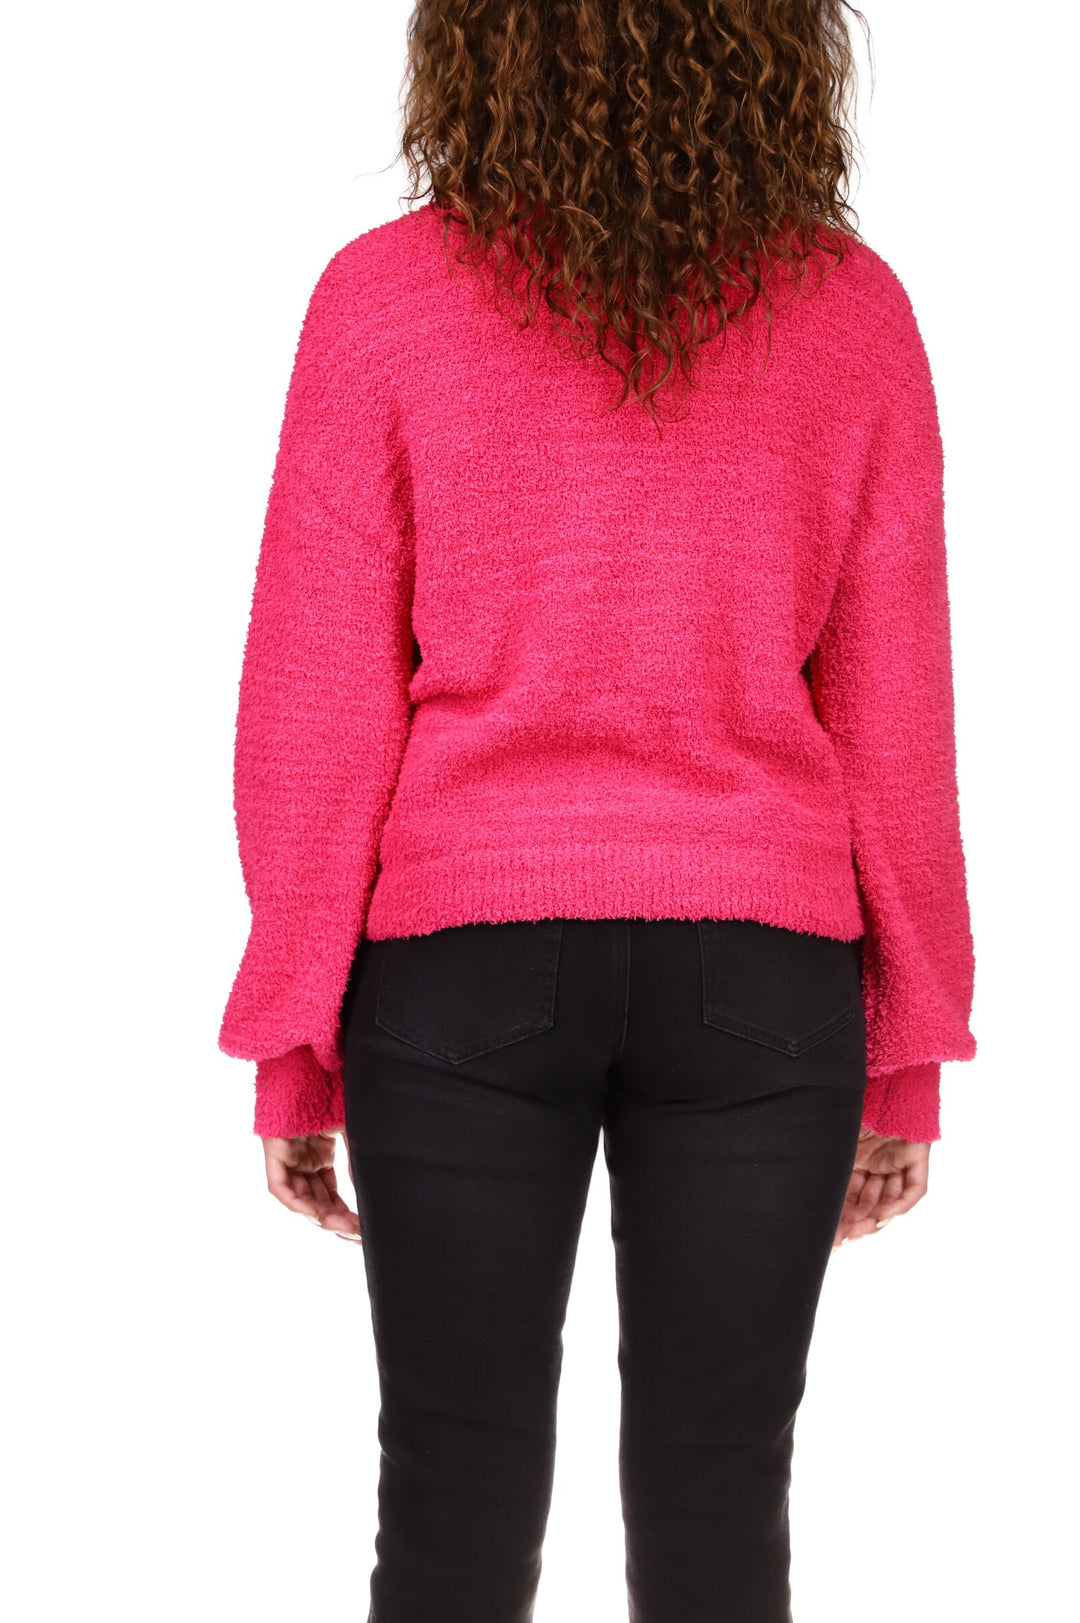 PLUSH VOLUME SLEEVE SWEATER - POWER PINK - Kingfisher Road - Online Boutique